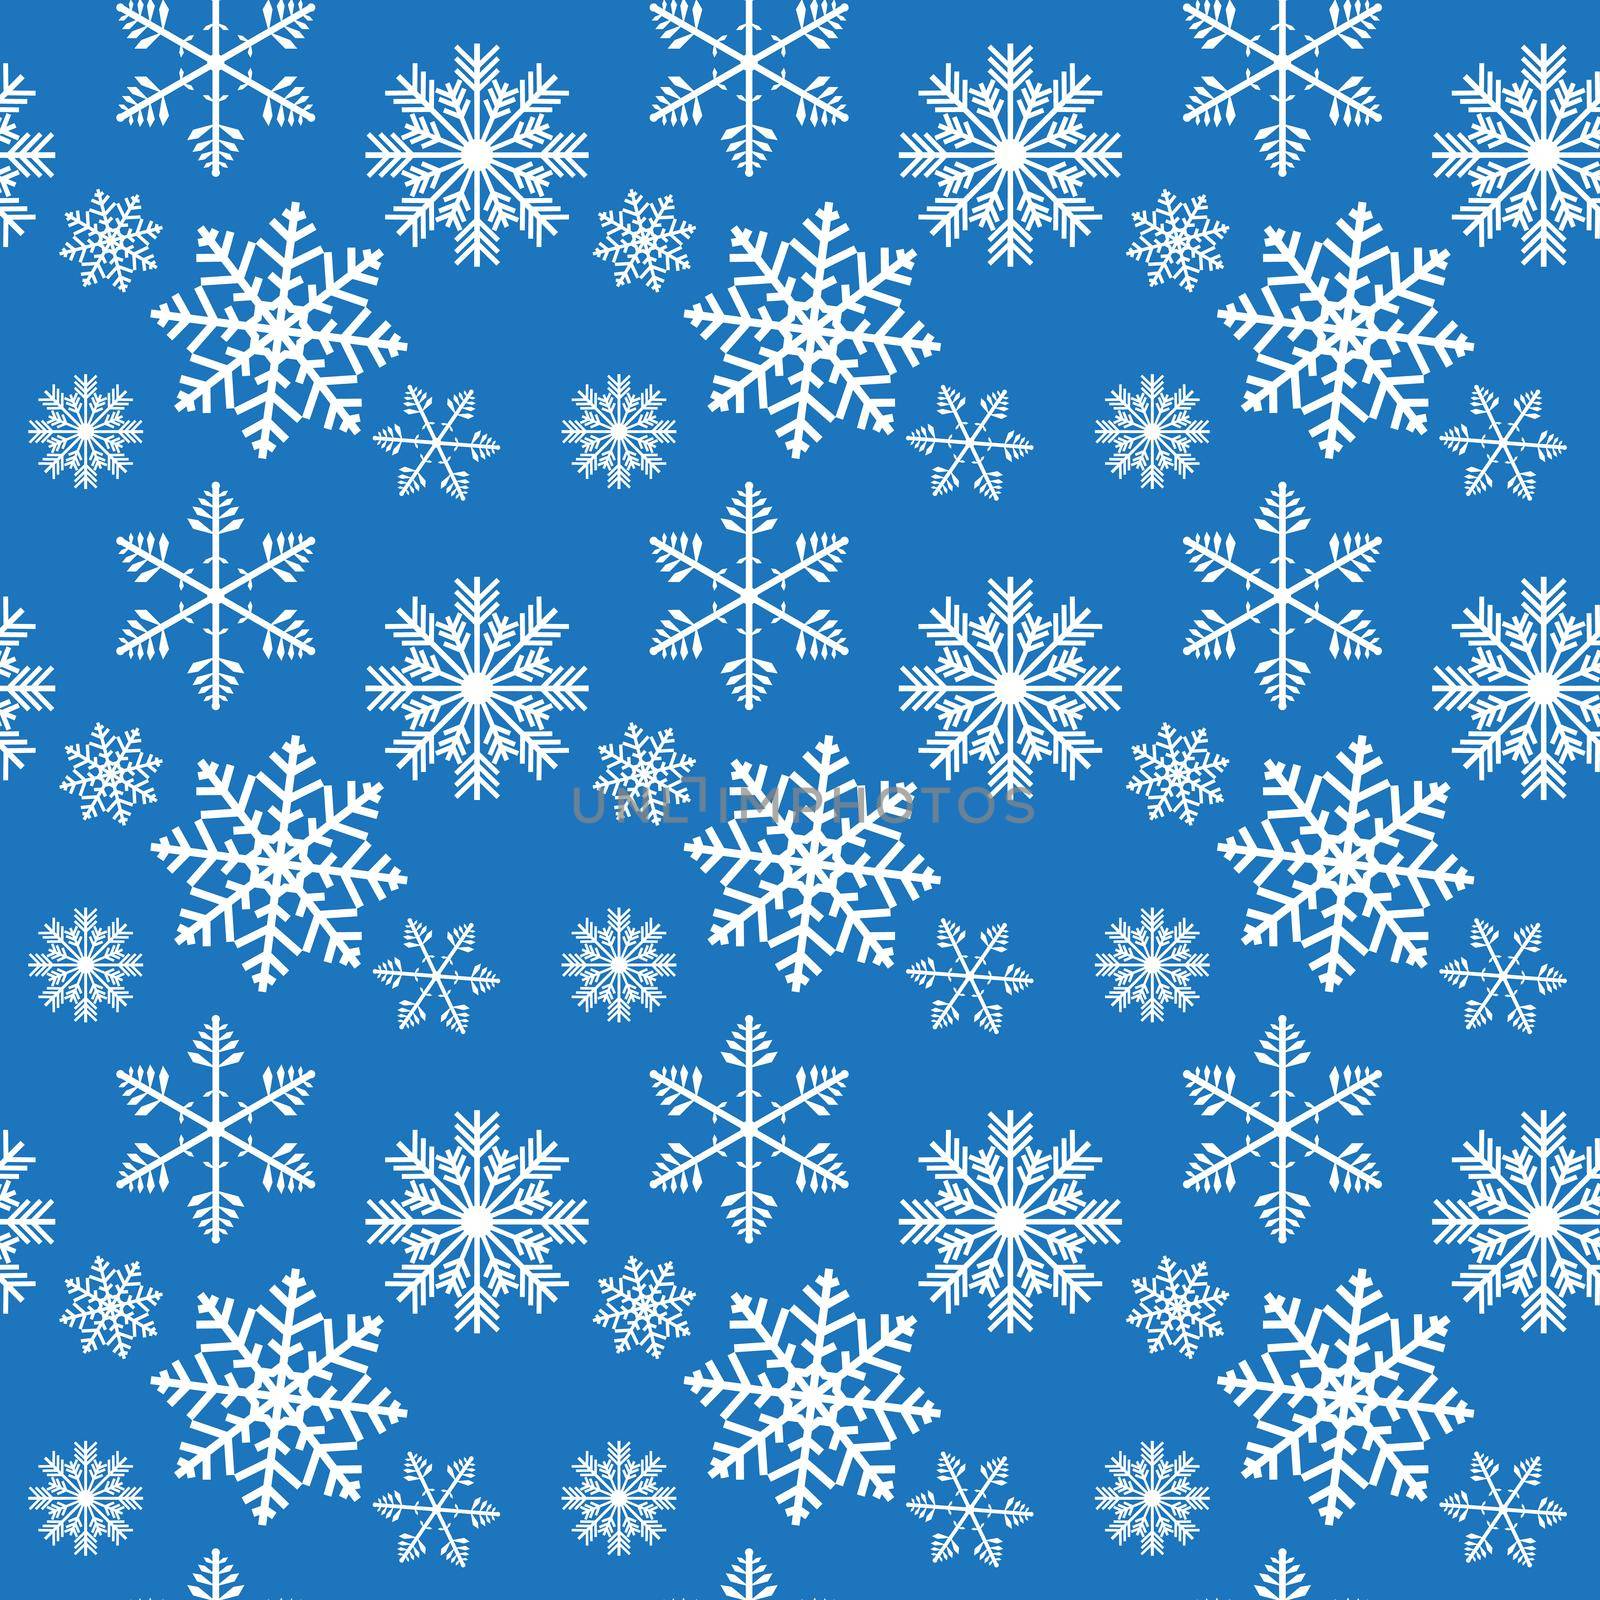 Abstract Beauty Christmas and New Year Background with Snow and Snowflakes. Vector Illustration by yganko